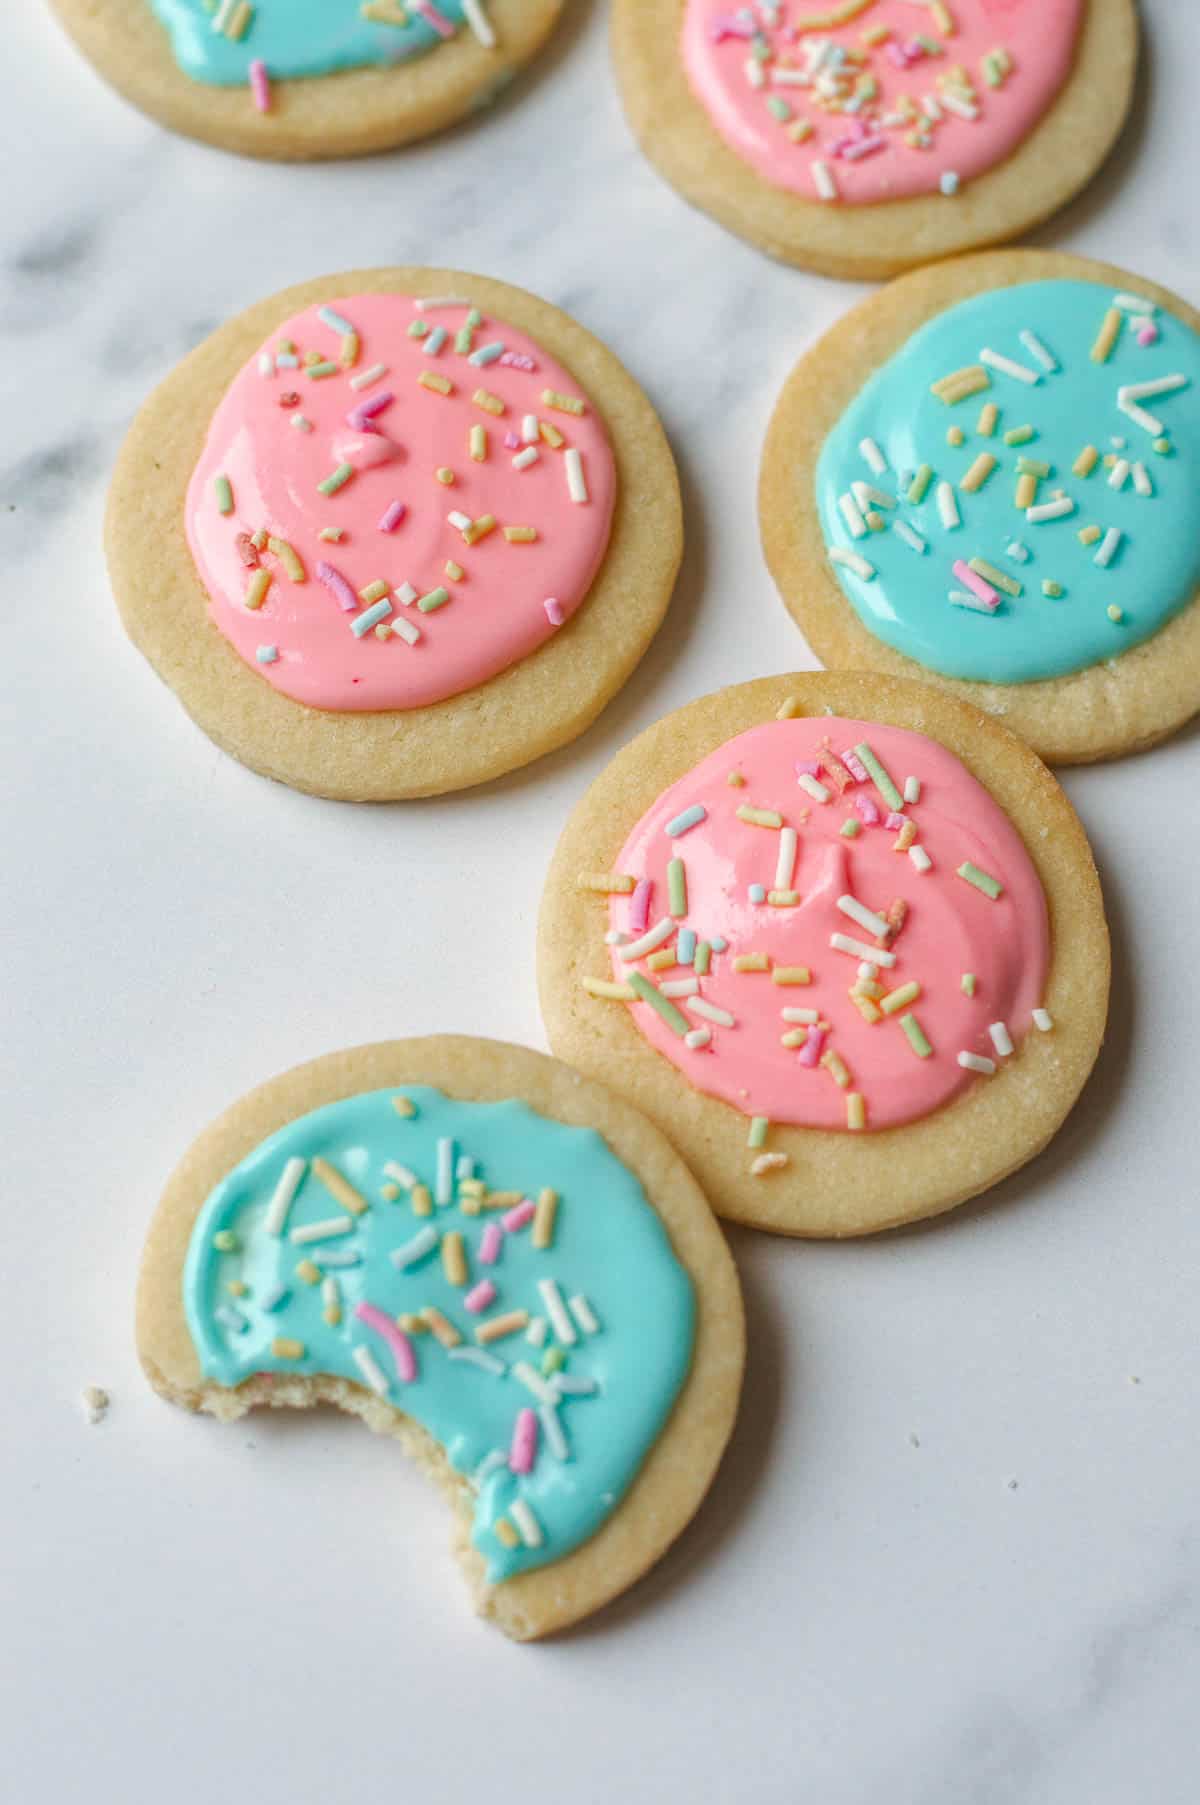 Sugar Cookies decorated in pink and blue icing with sprinkles.